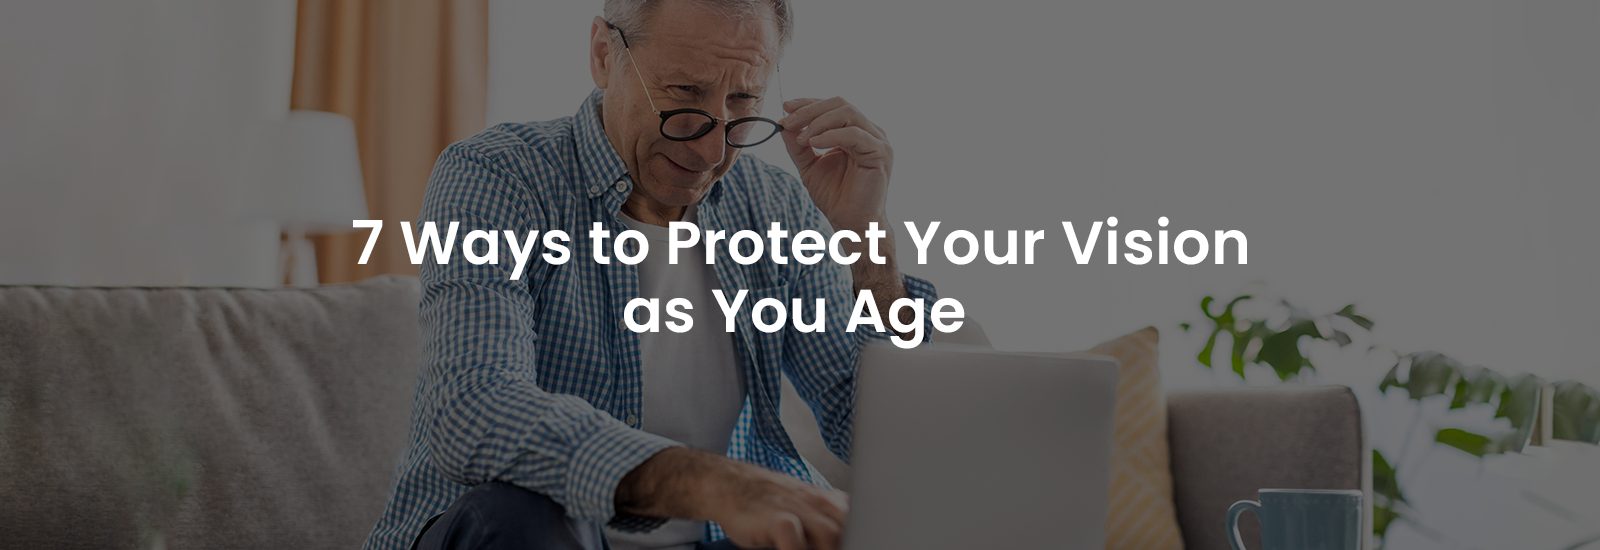 7 Ways to Protect Your Vision as You Age | Banner Image